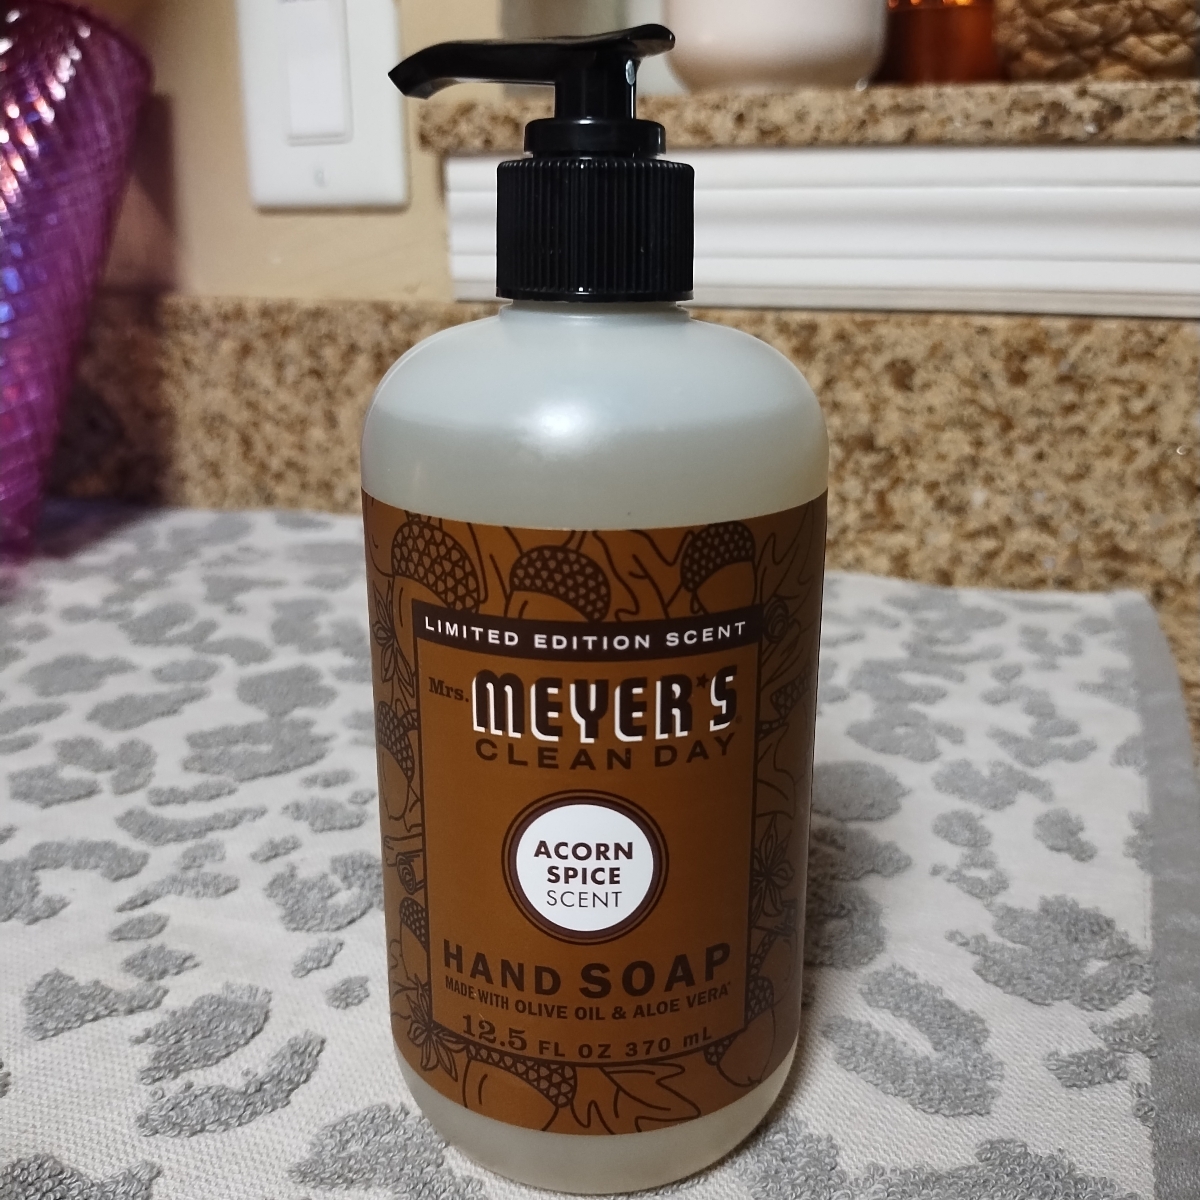 Mrs. Meyer's Clean Day Hand Soap Acorn Spice Reviews | abillion